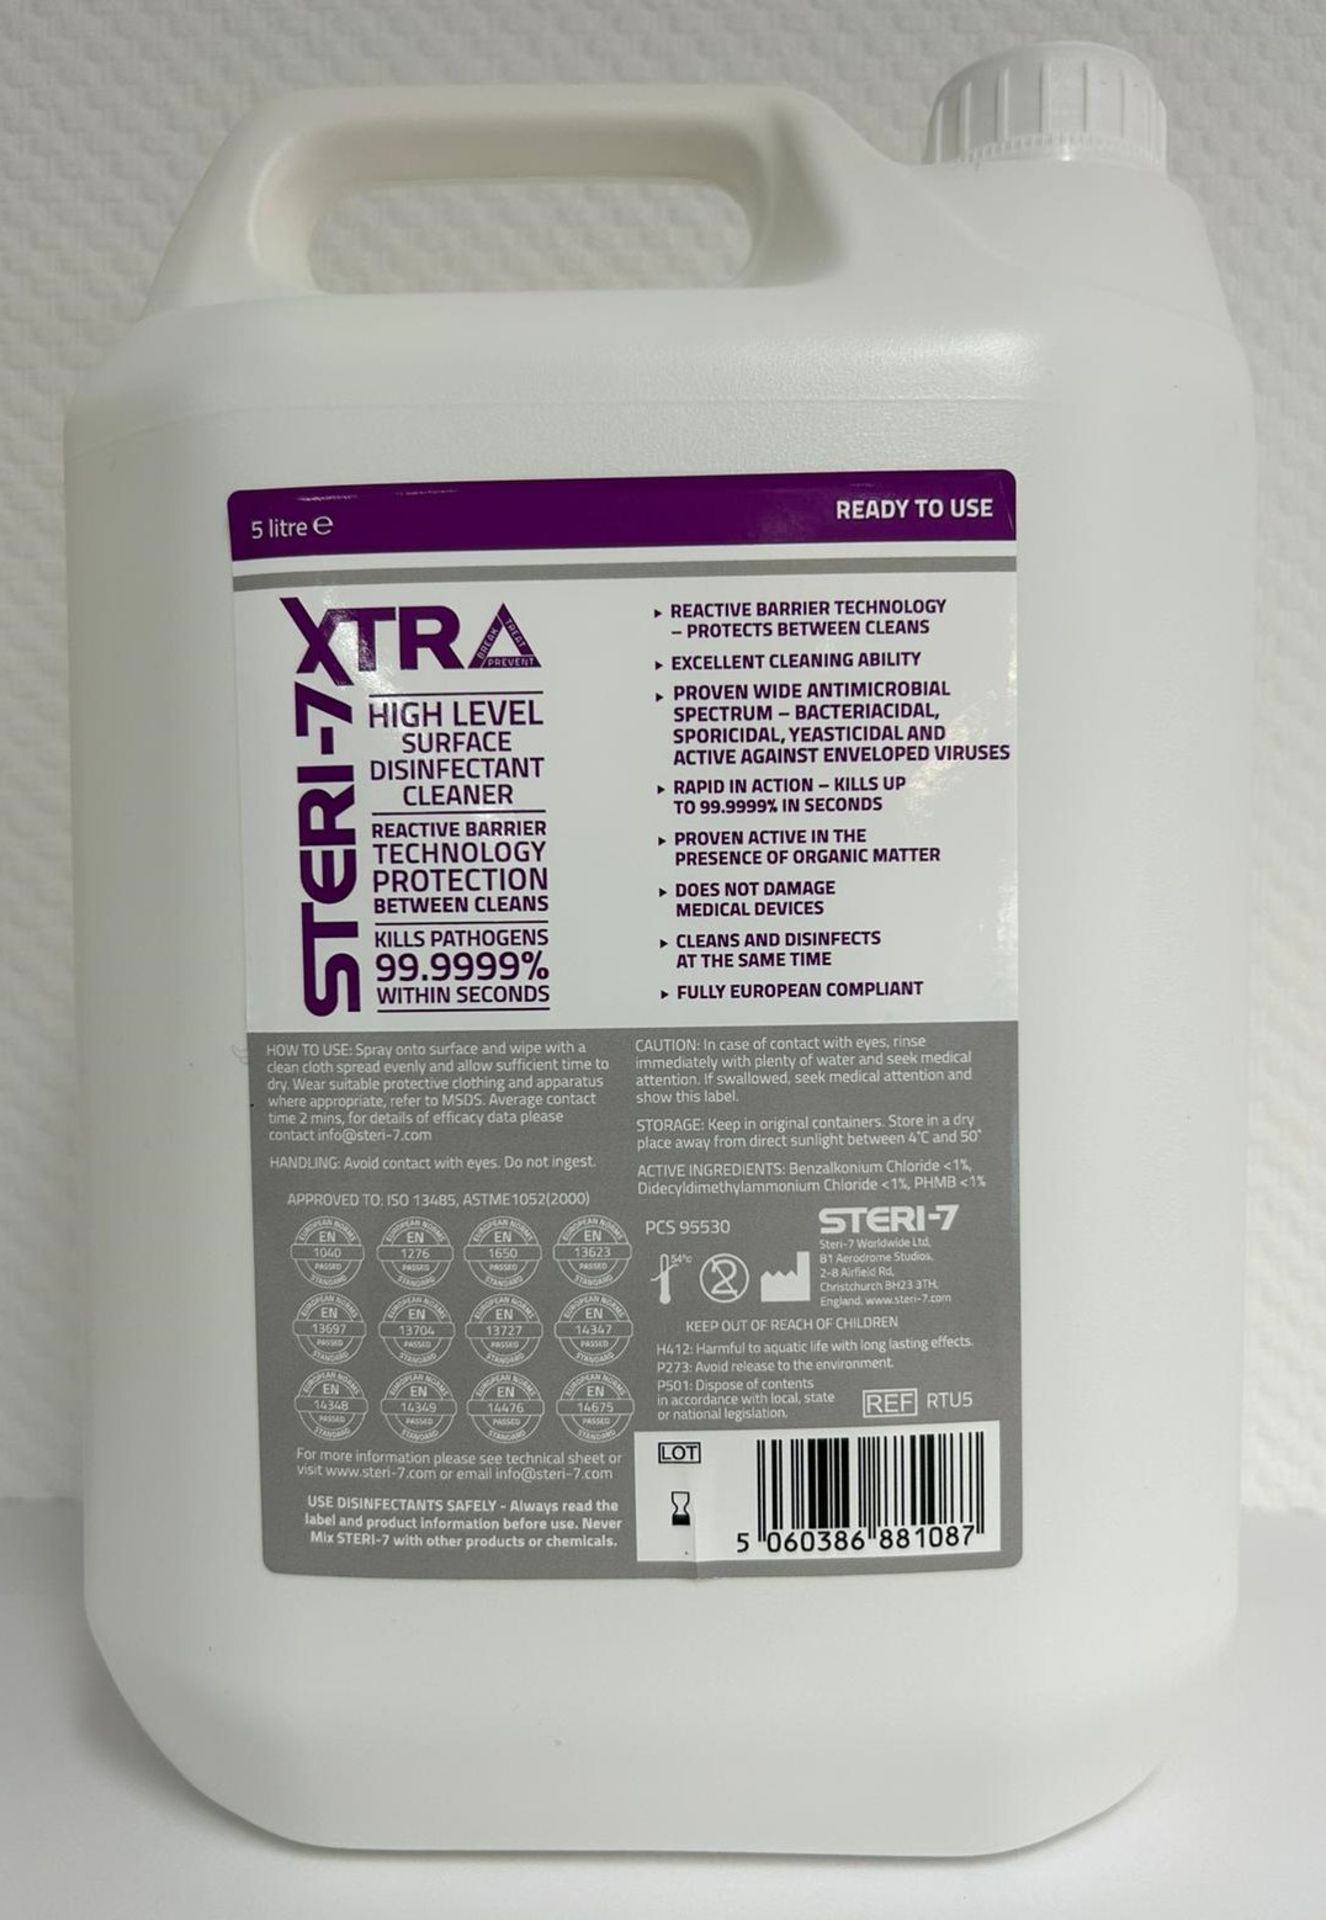 4 x Steri-7 5L Bottles of Xtra High Level Surface Disinfectant Cleaner - Ready to Use (1 outer box)